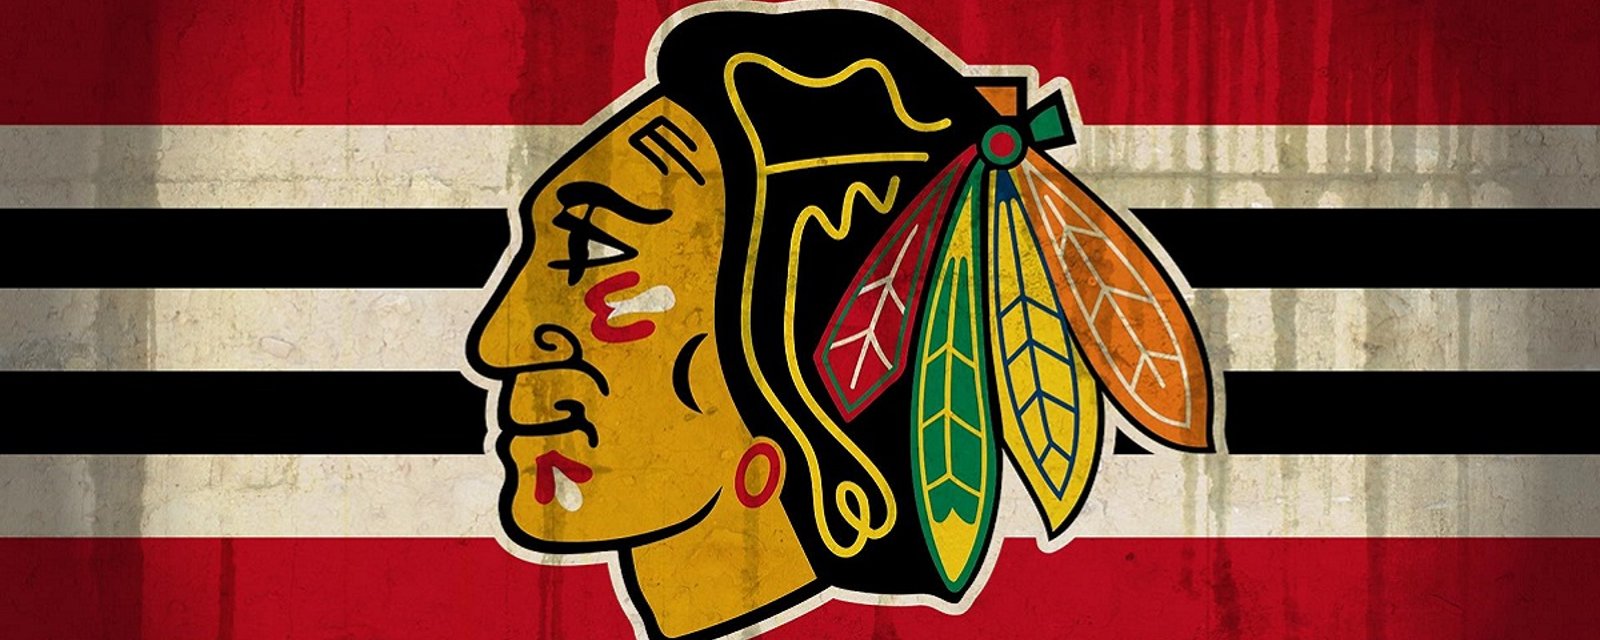 Breaking: Blackhawks sign a new goalie, and re-sign a forward.